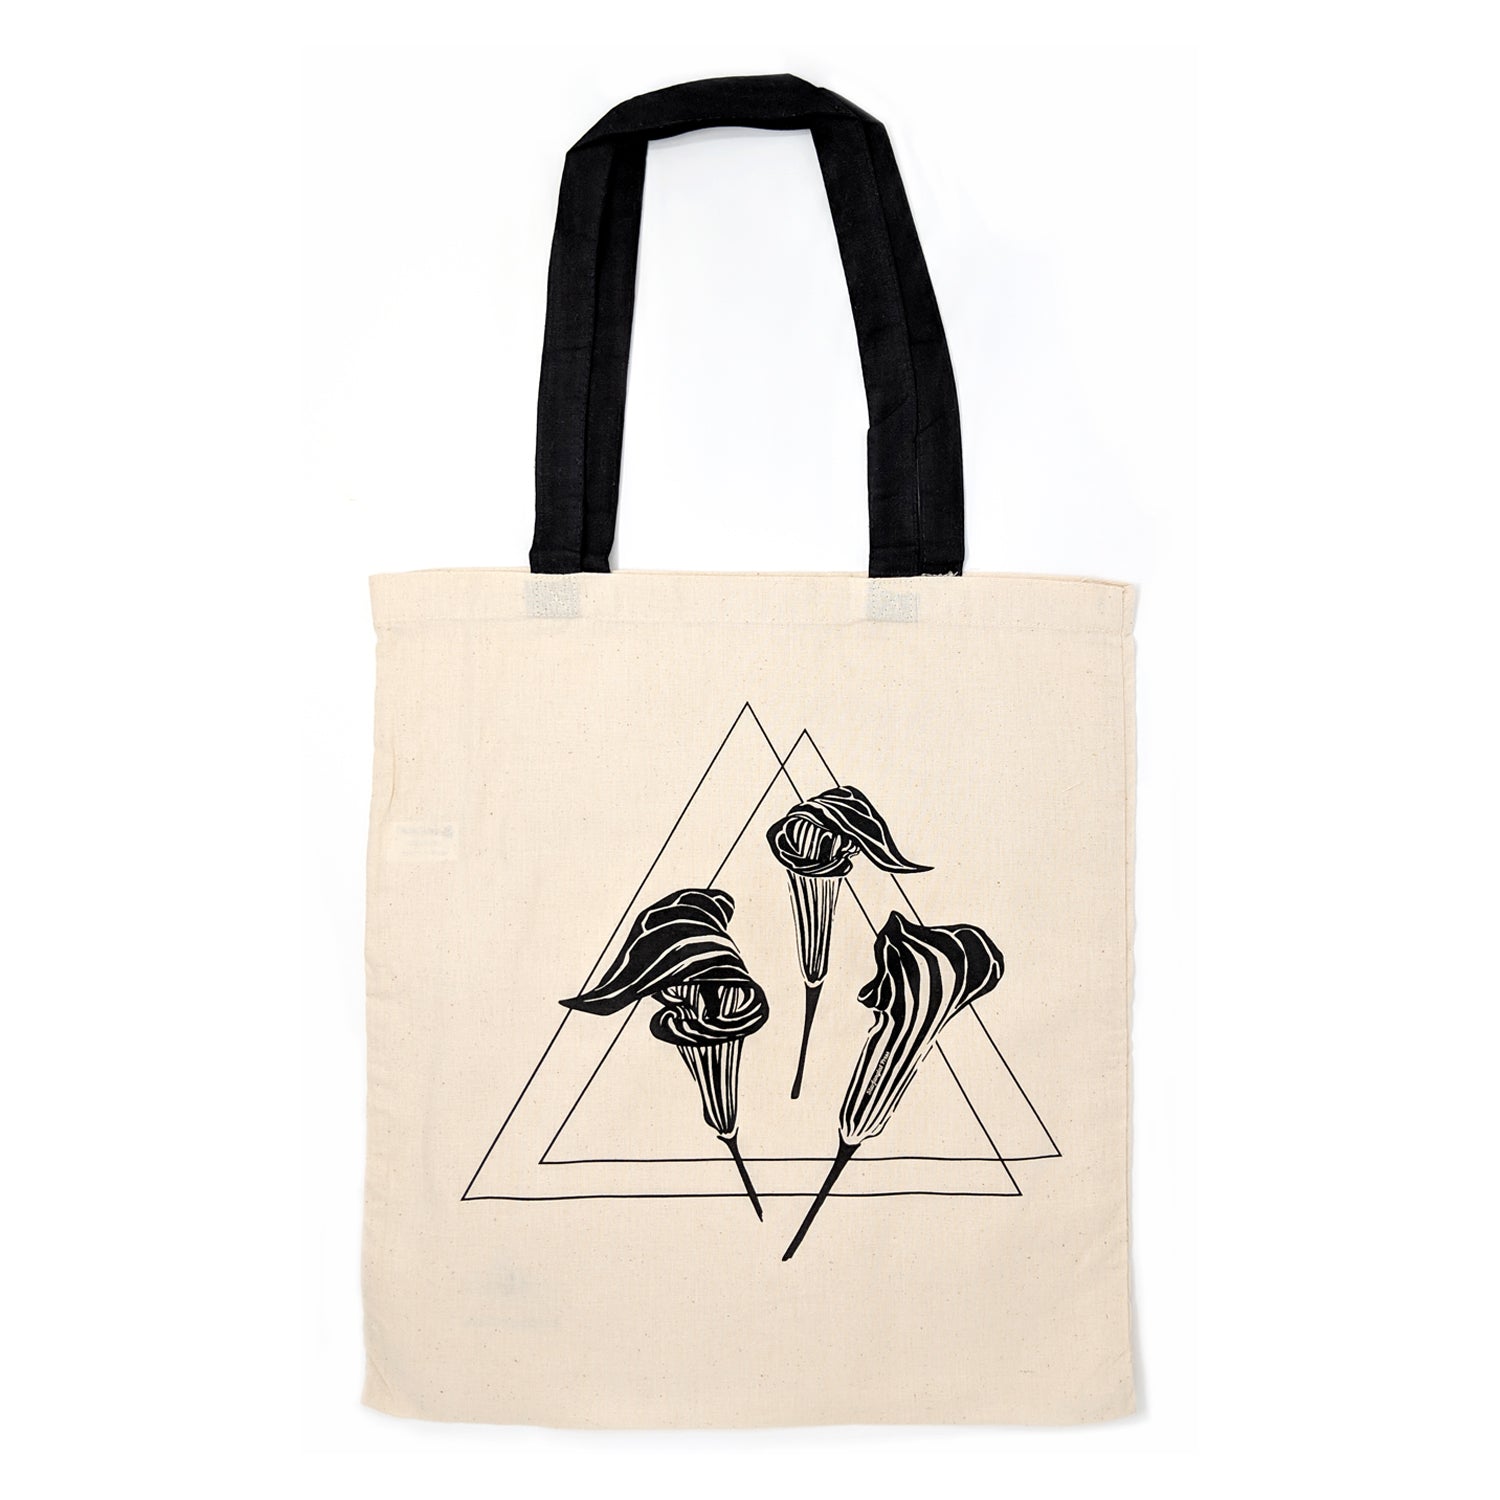 Jack-in-the-pulpit Tote Bag